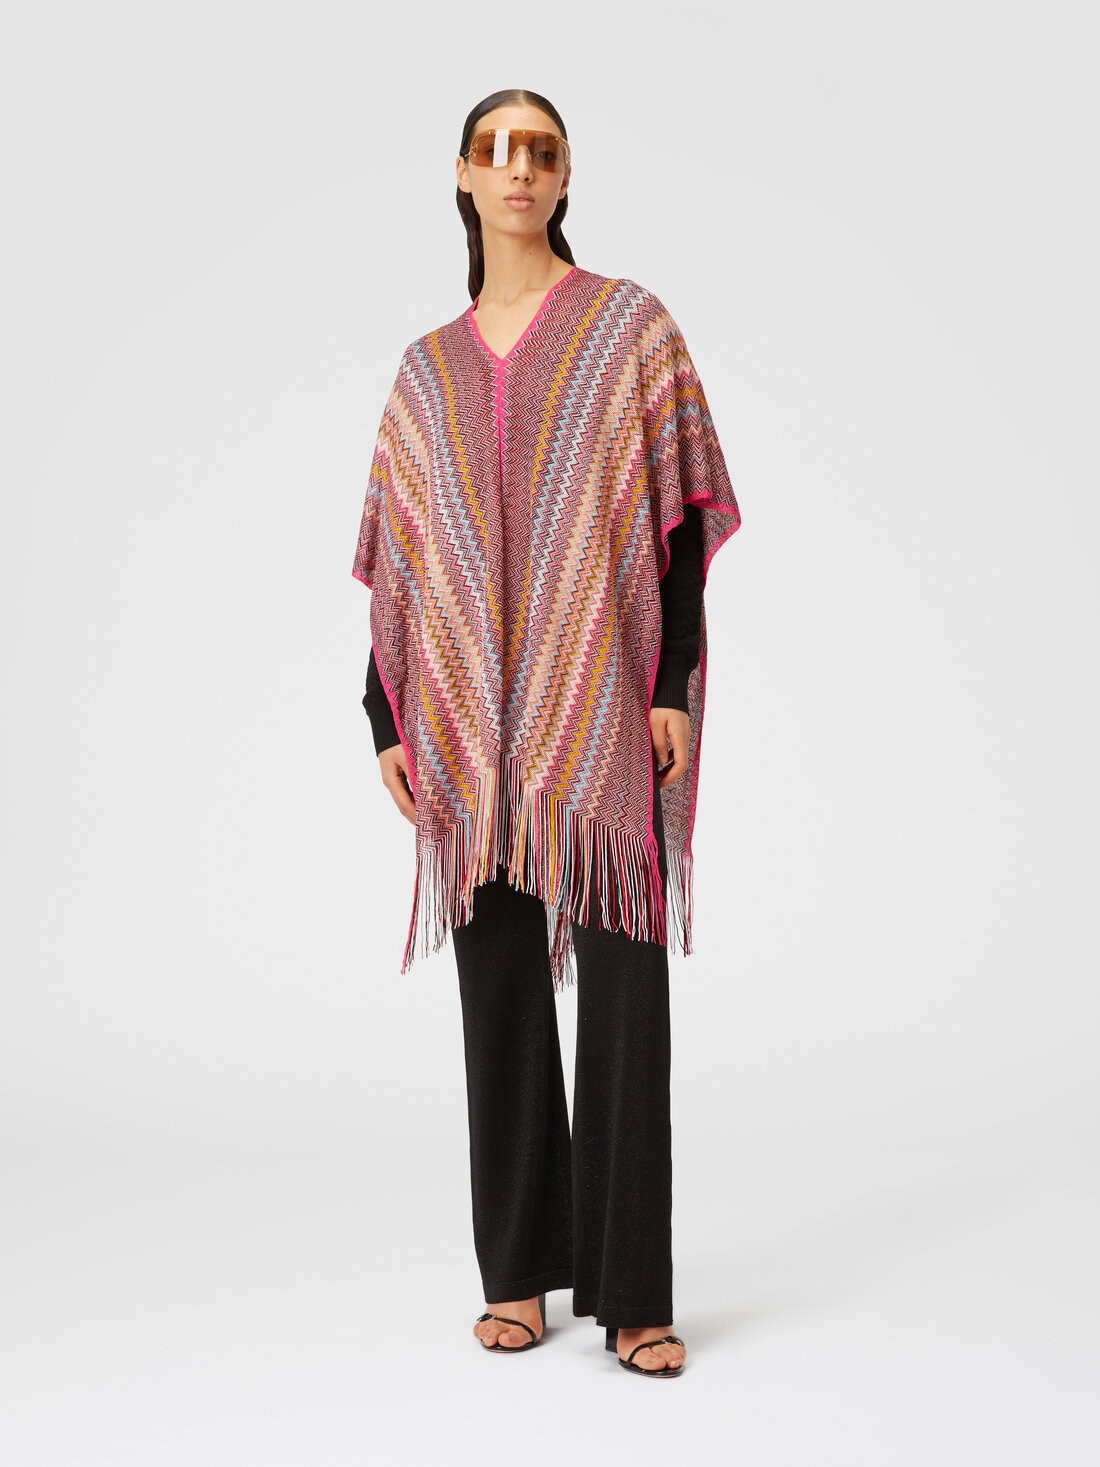 Poncho in zigzag viscose knit with fringes, Multicoloured  - 8053147141220 - 1